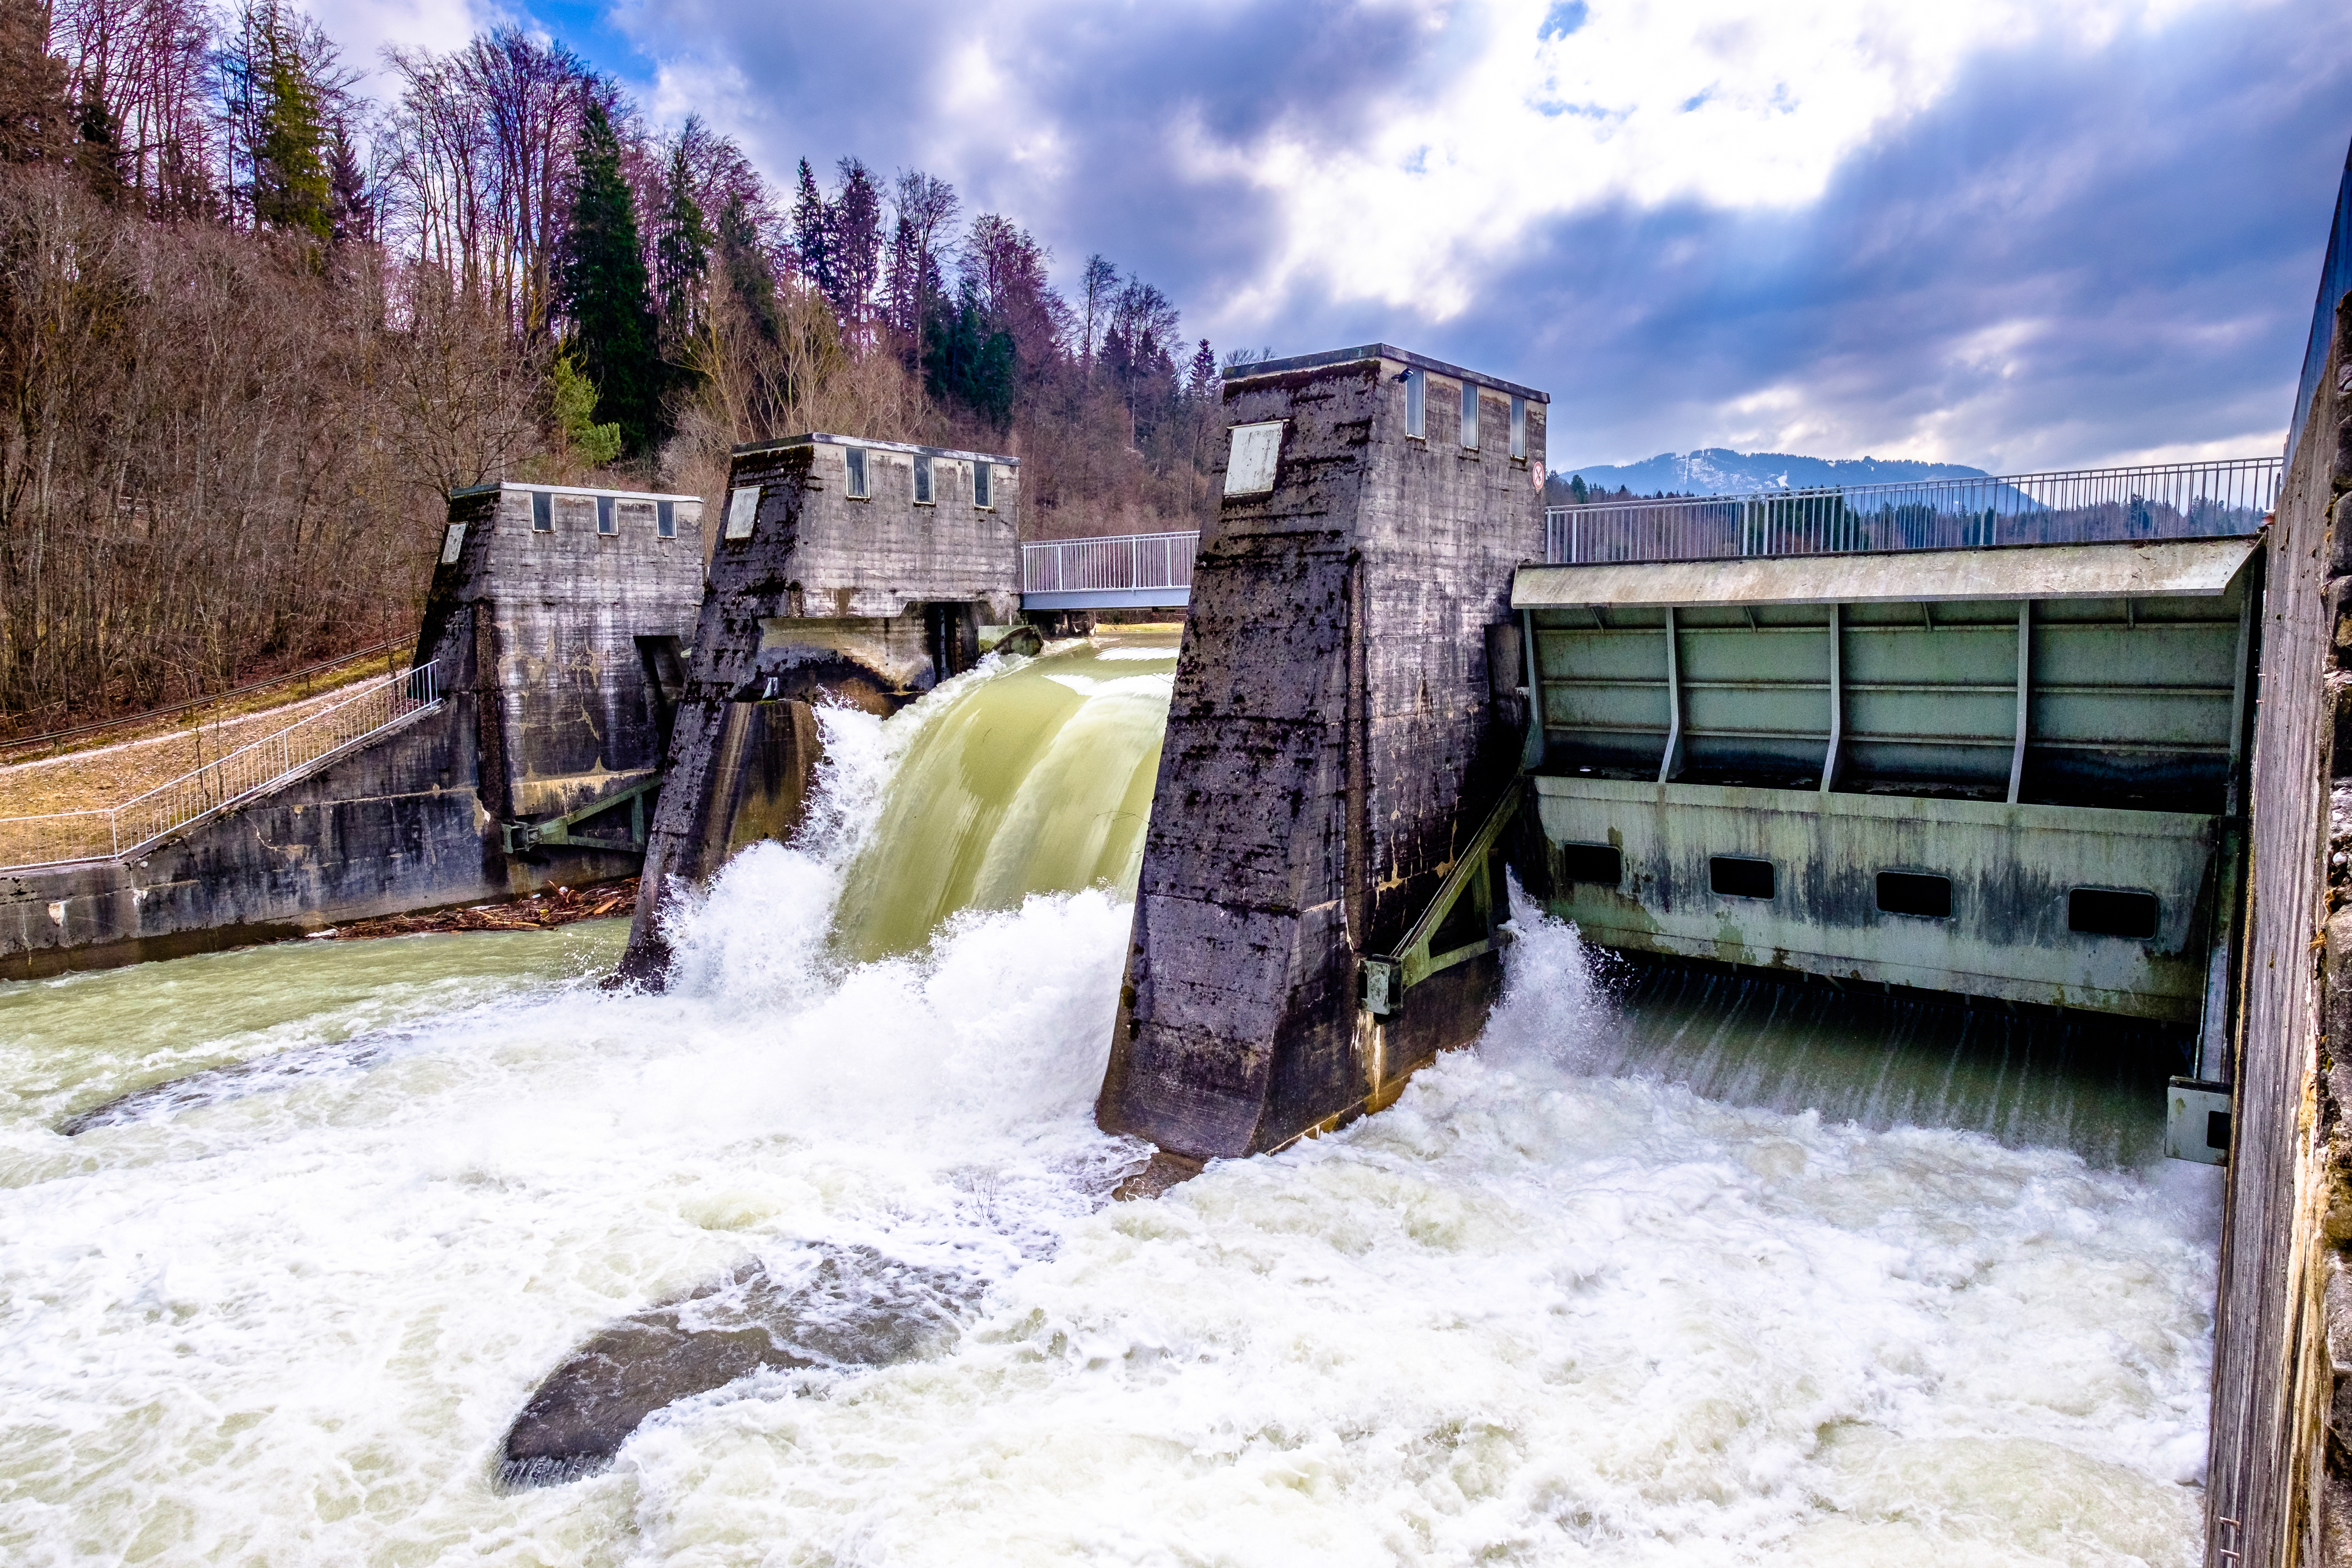 Dam in a river producing electricity